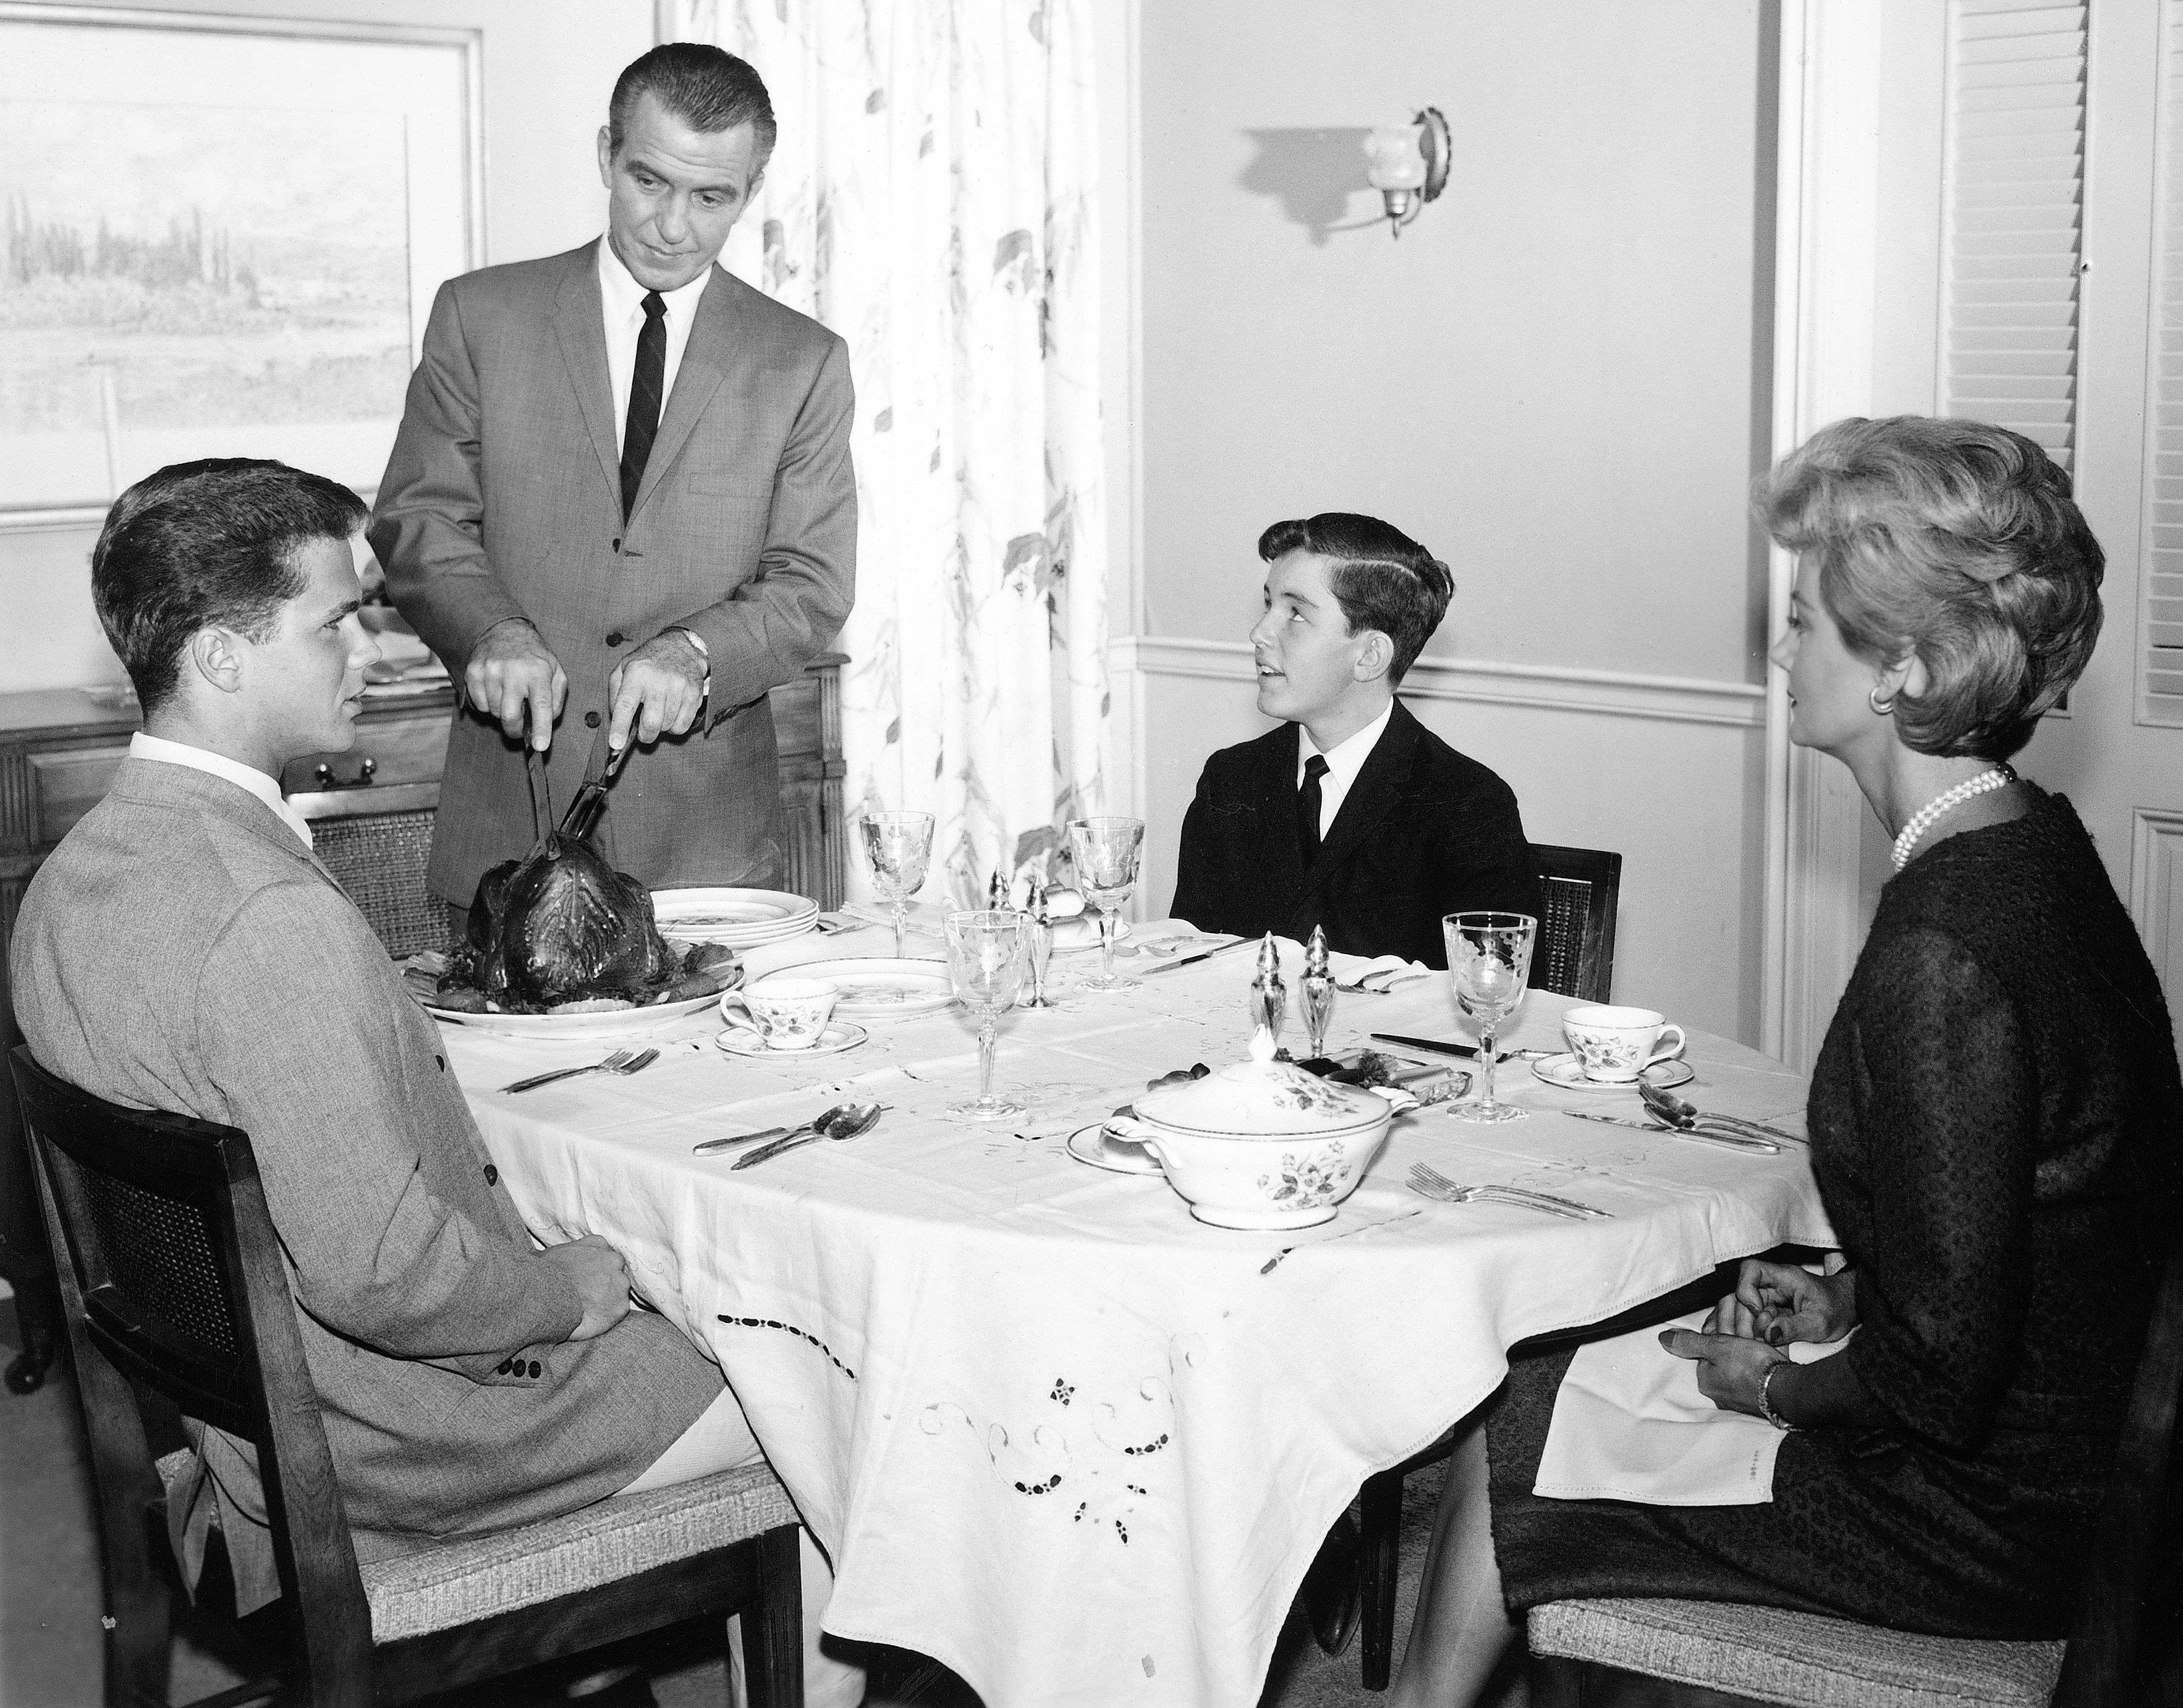 The cast of 'Leave It to Beaver': Tony Dow, Hugh Beaumont, Jerry Mathers, and Barbara Billingsley dressed formally in a dinnertime scene